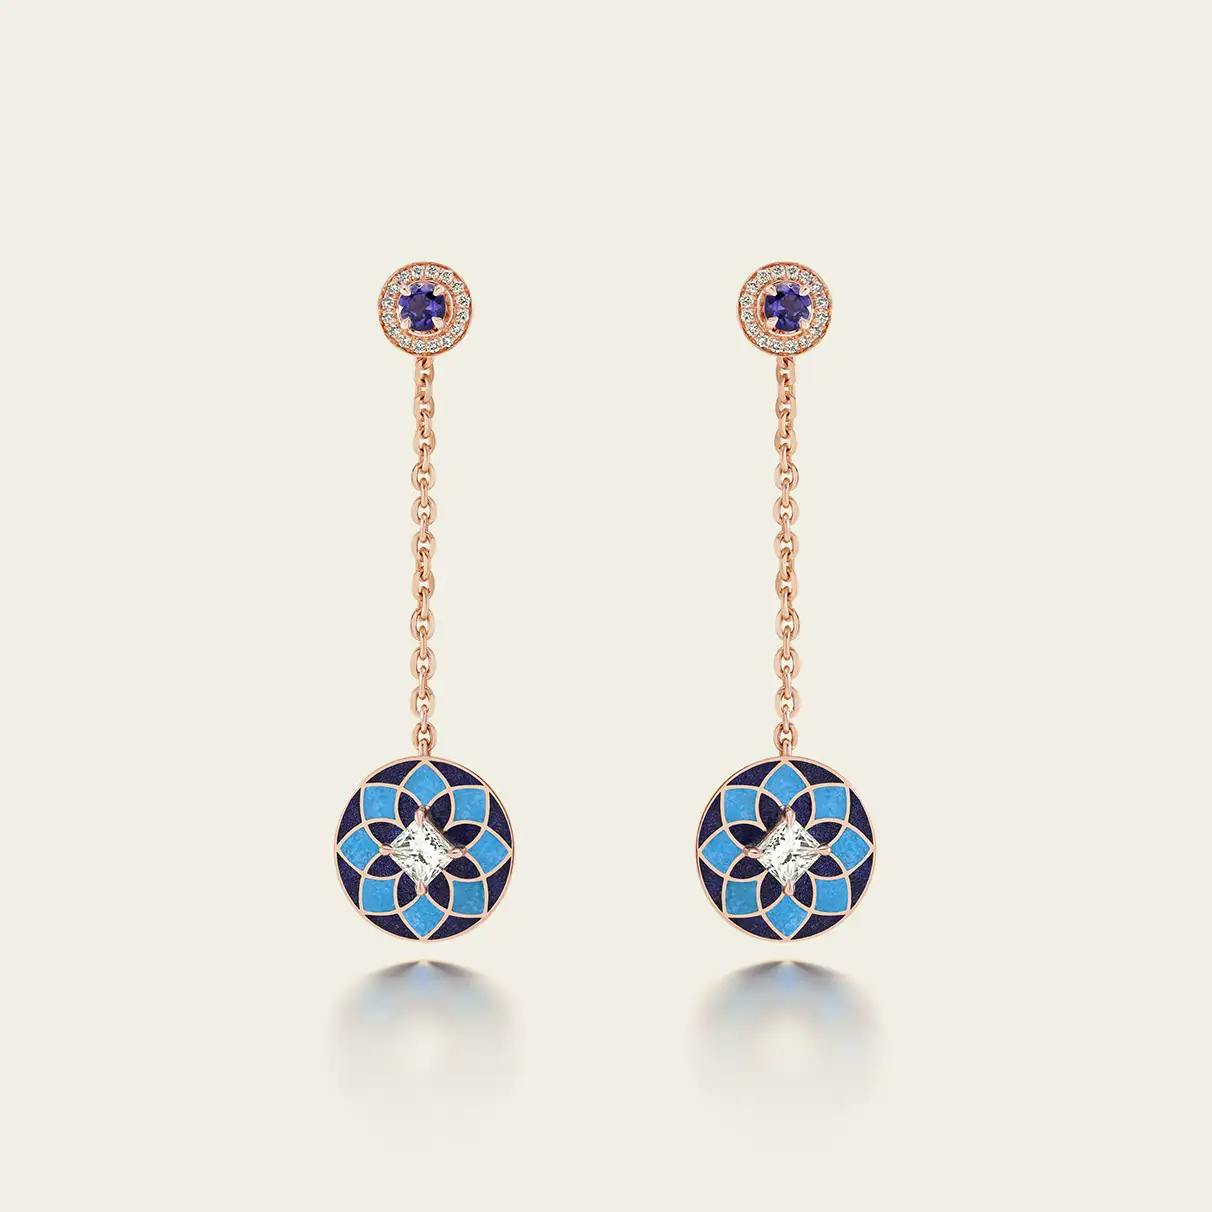 18K recycled rose-gold earrings with lapis and turquoise inlay, princess-cut diamonds and iolites.